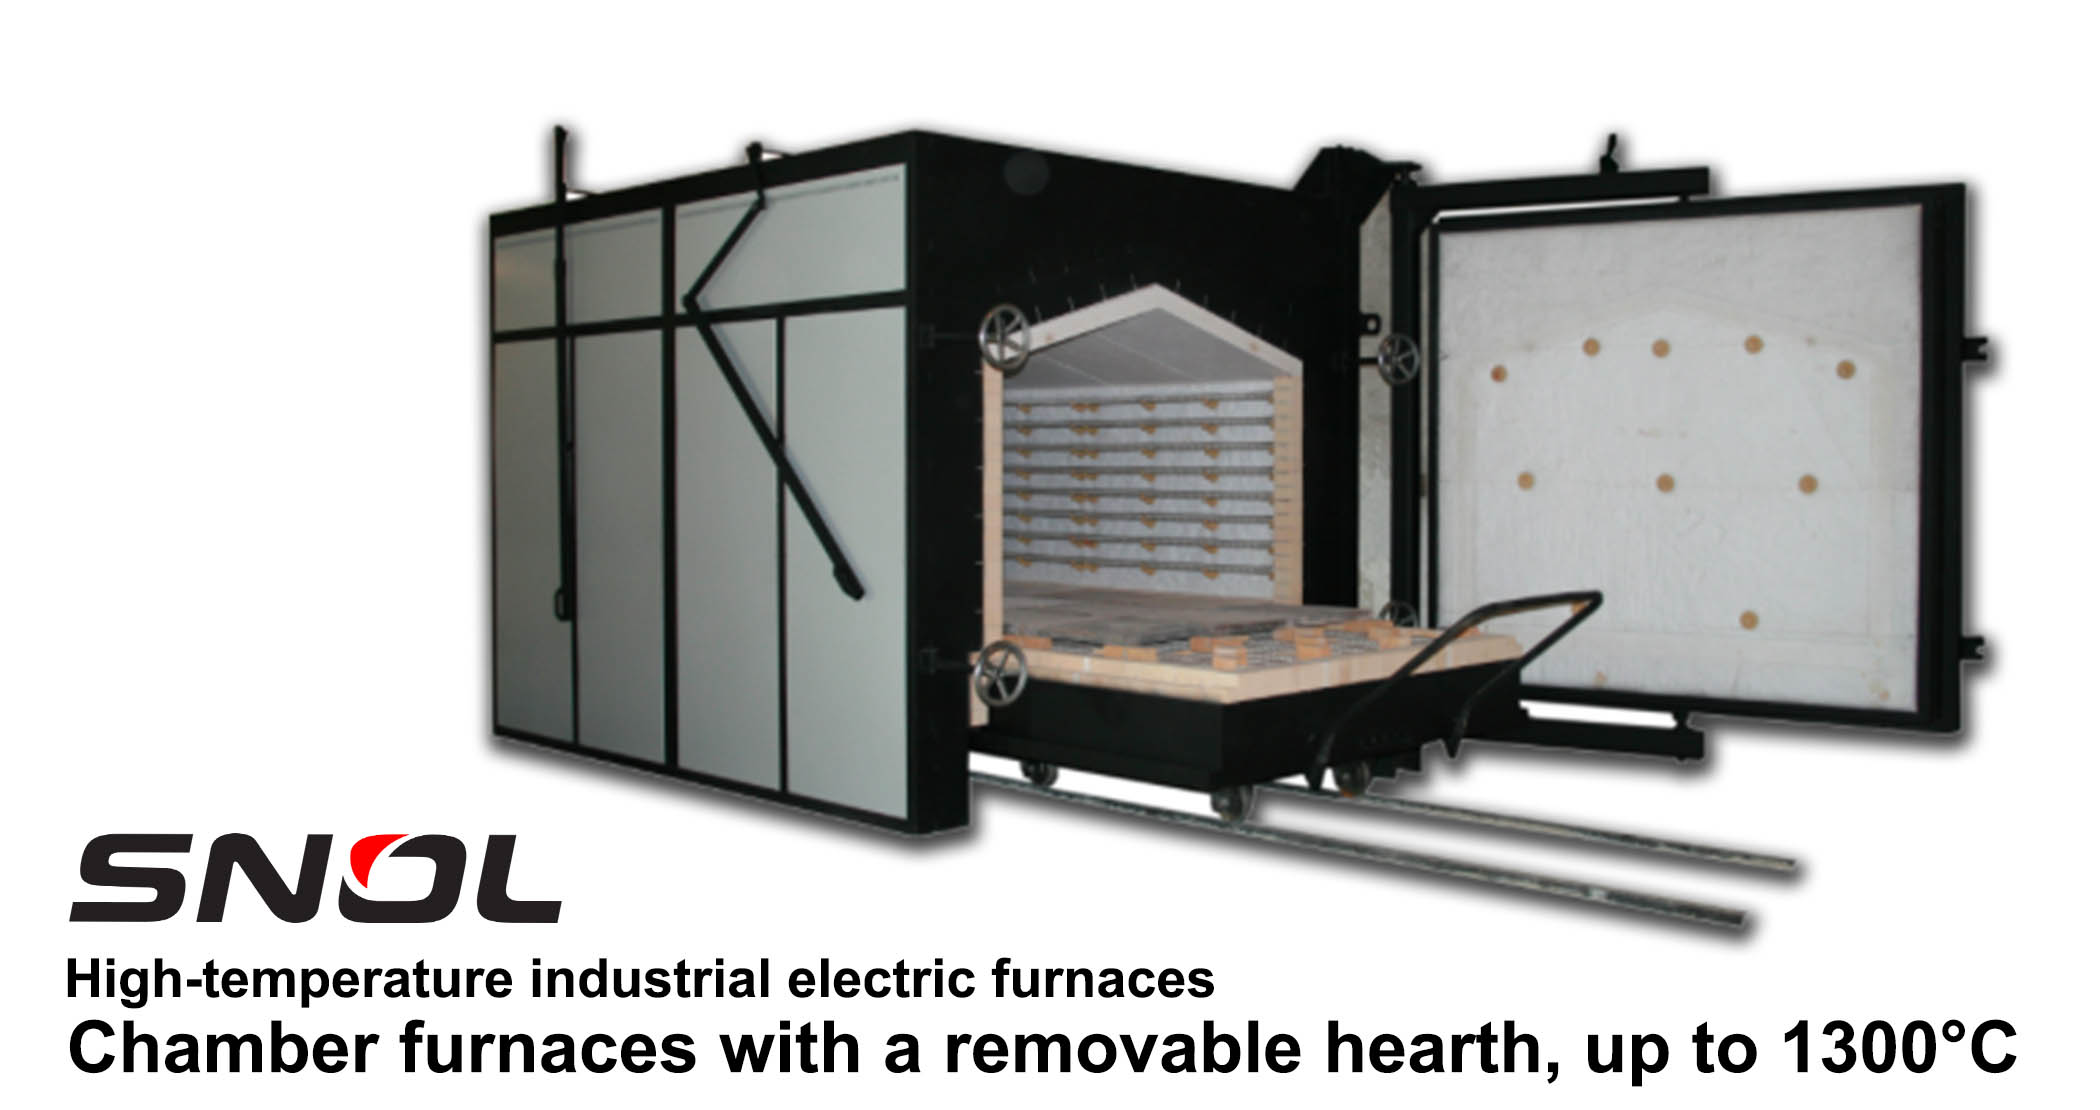 High-temperature industrial chamber furnaces with a removable hearth